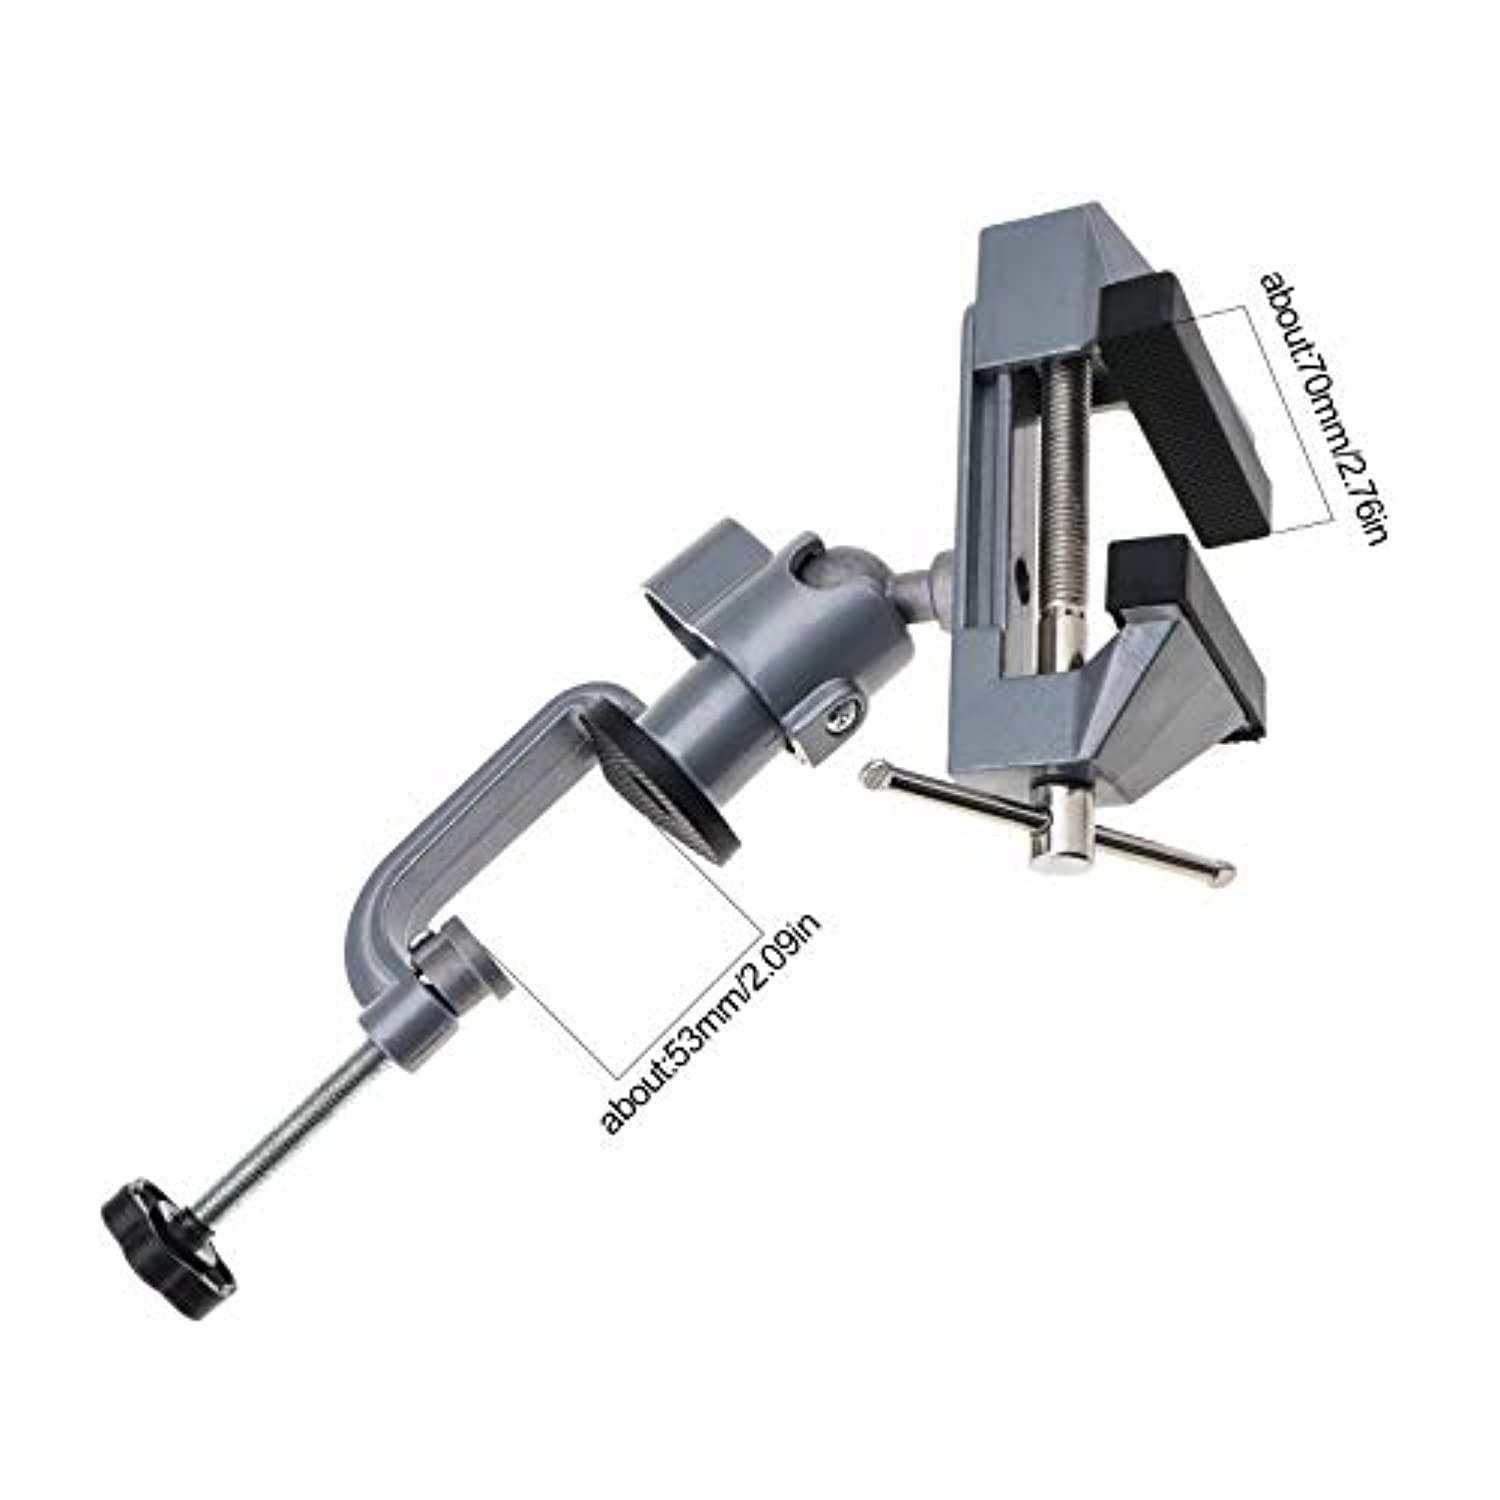 Micro Traders 360universal vice aluminum alloy mini table clamp bench vise 70mm rubber jaws diy craft tool for modelling painting gluing so